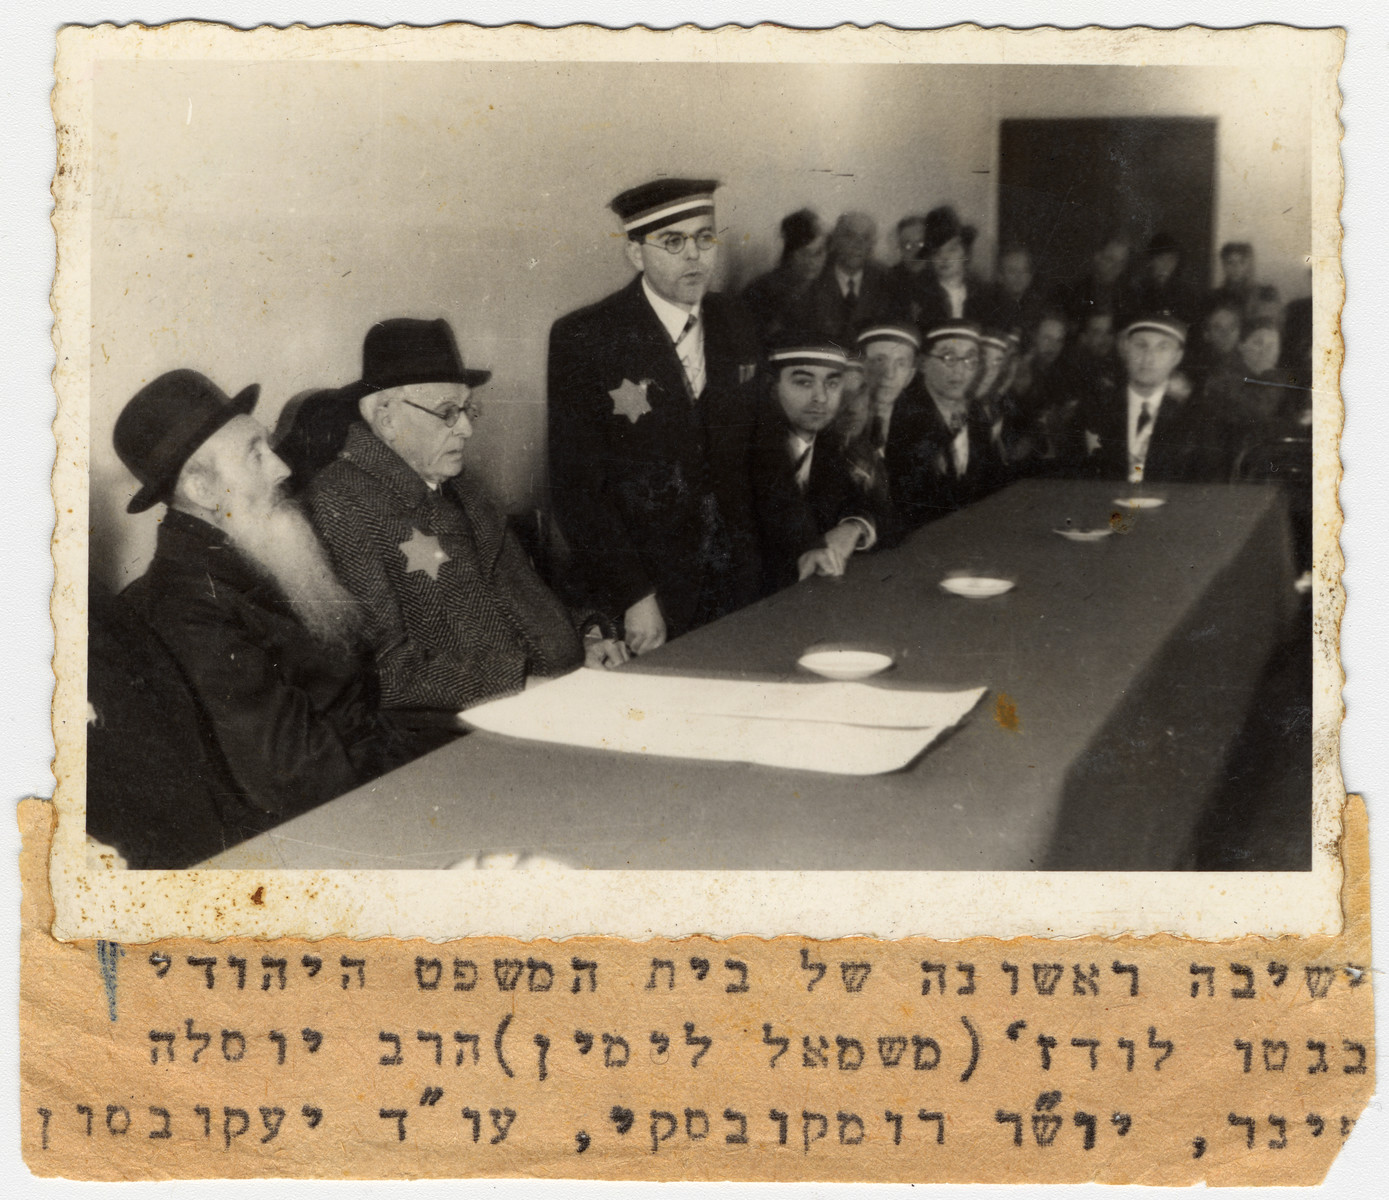 Mordechai Chaim Rumkowski, chairman of the Jewish Council in the Lodz ghetto, attends the swearing-in ceremony for the judges of the Jewish court.

Speaking is attorney Stanislaw Jakobson.  Pictured on the right of Rumkowski is Rabbi Yosif Fajner.